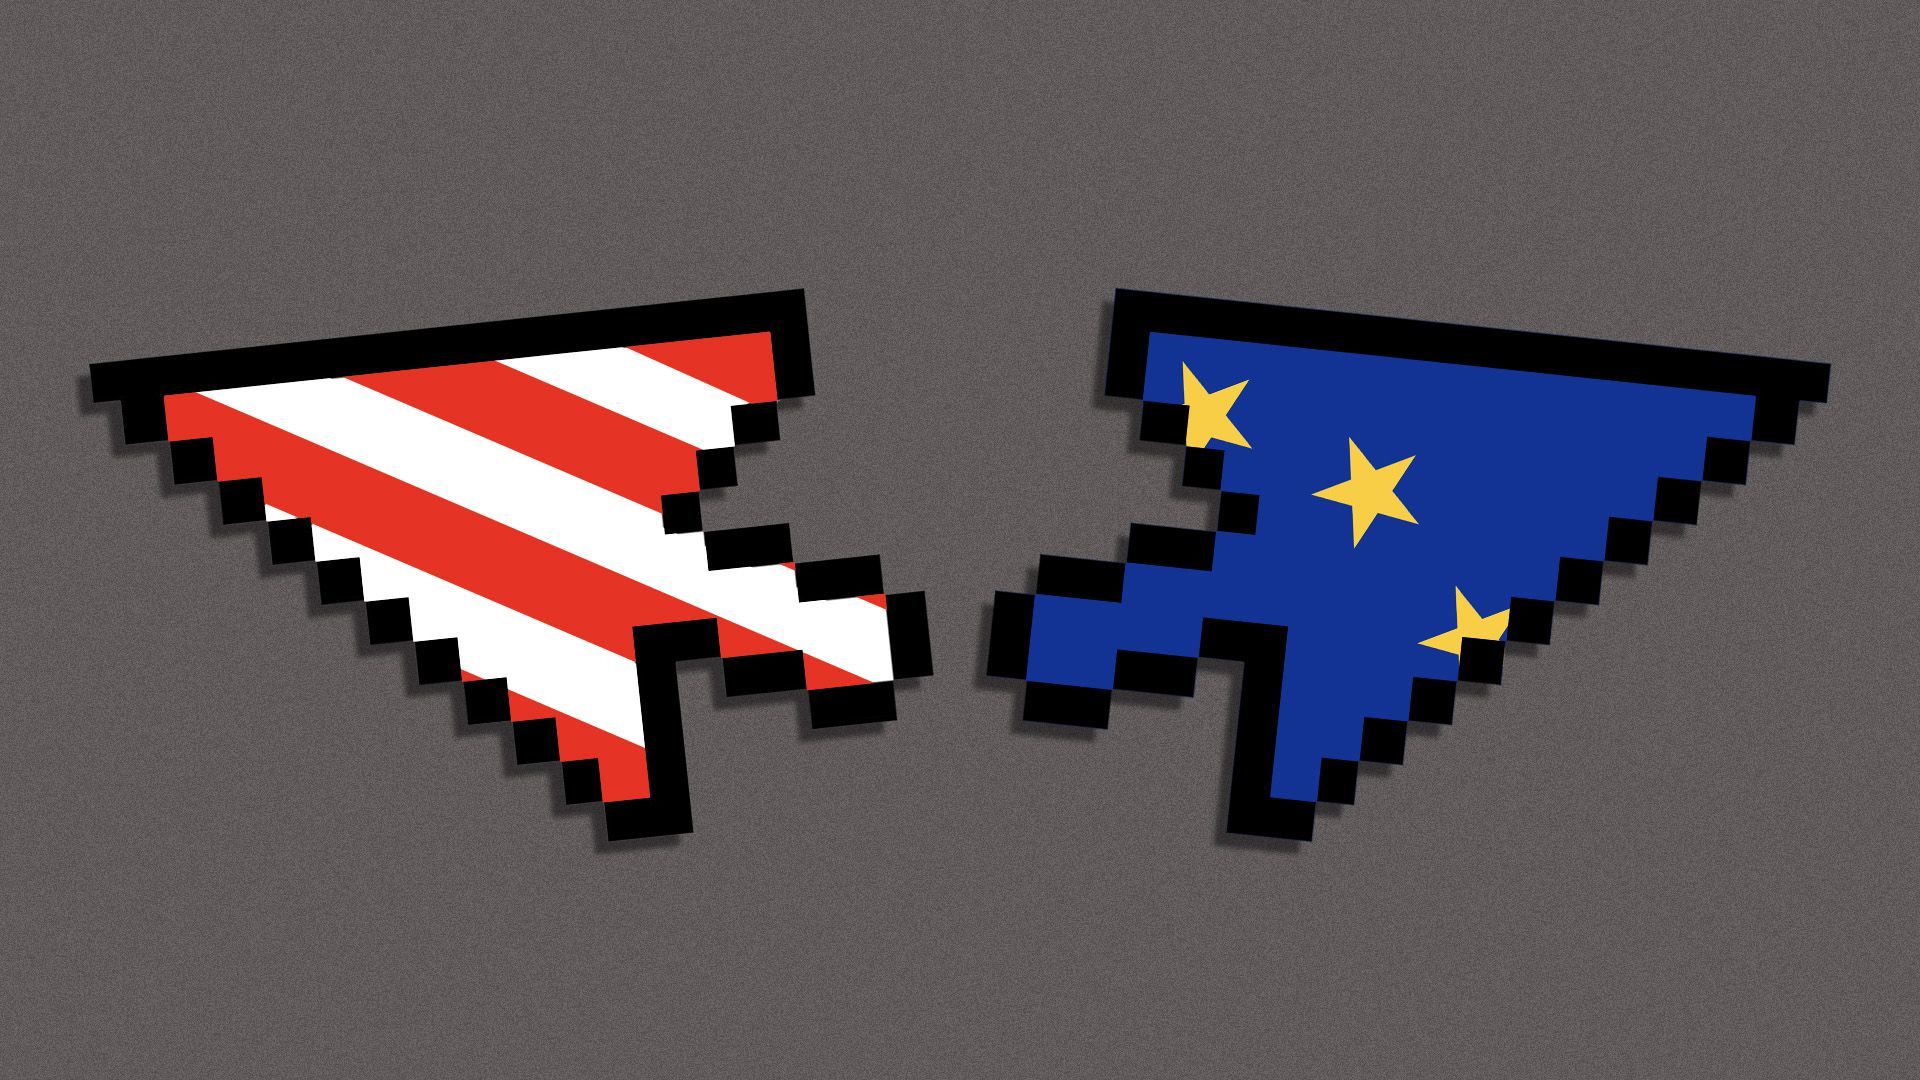 Illustration of a cursor patterned with the US flag pointing away from a cursor patterned with the EU flag